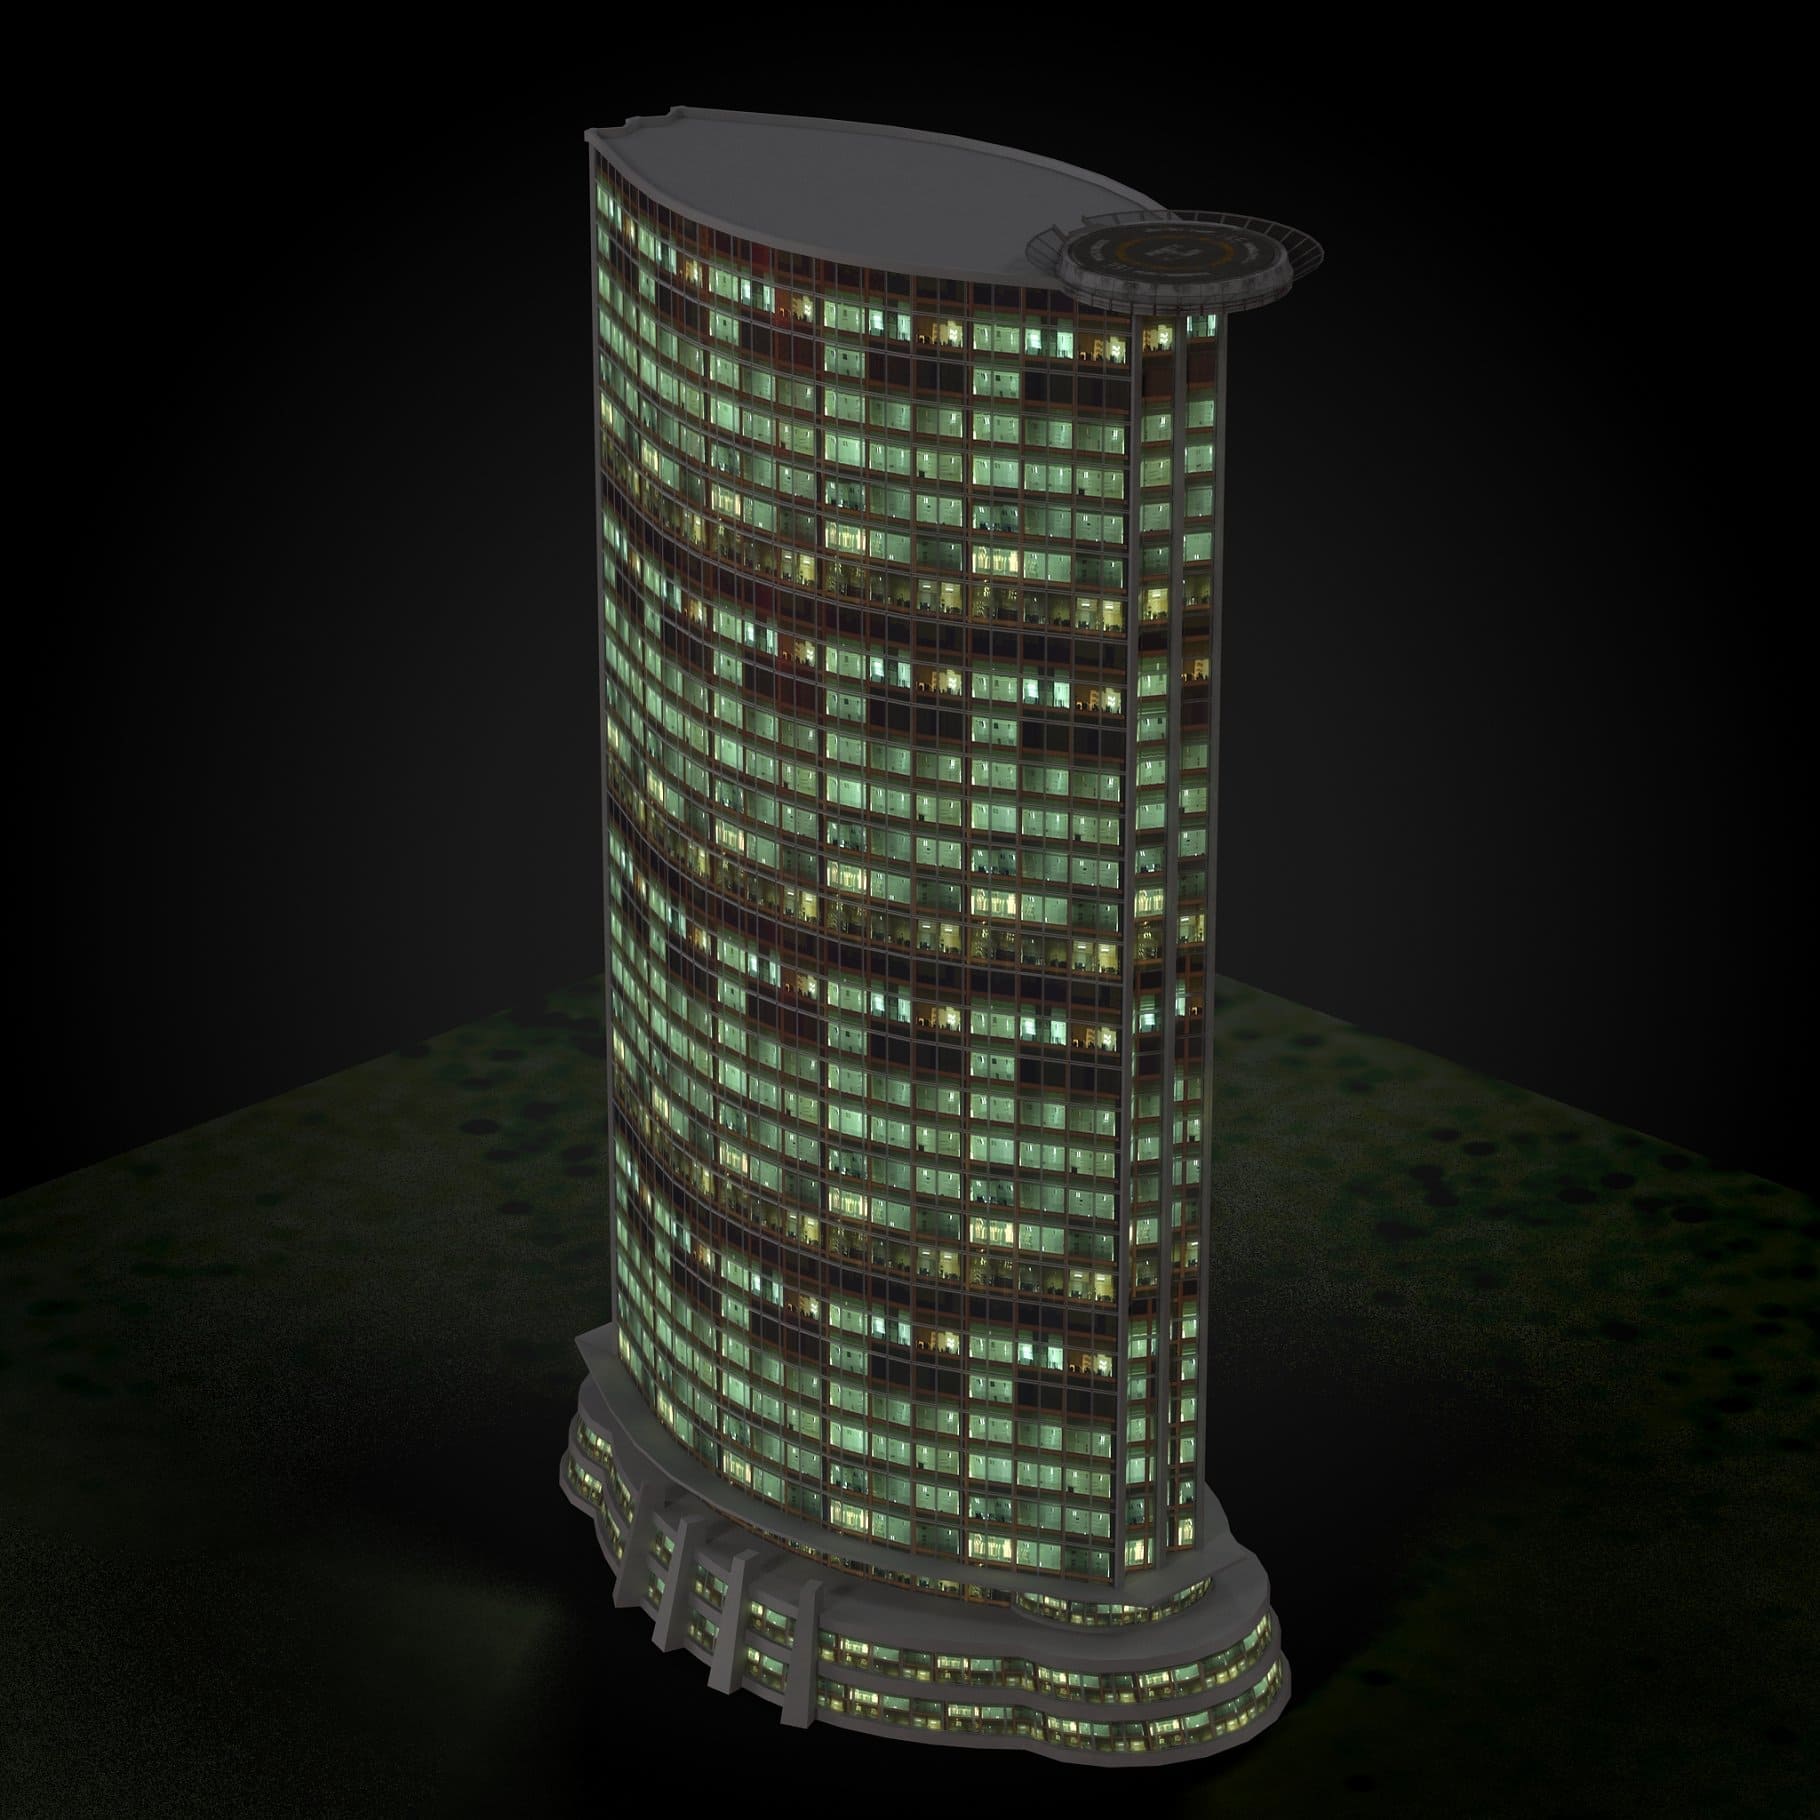 A skyscraper is drawn on a summer night background.